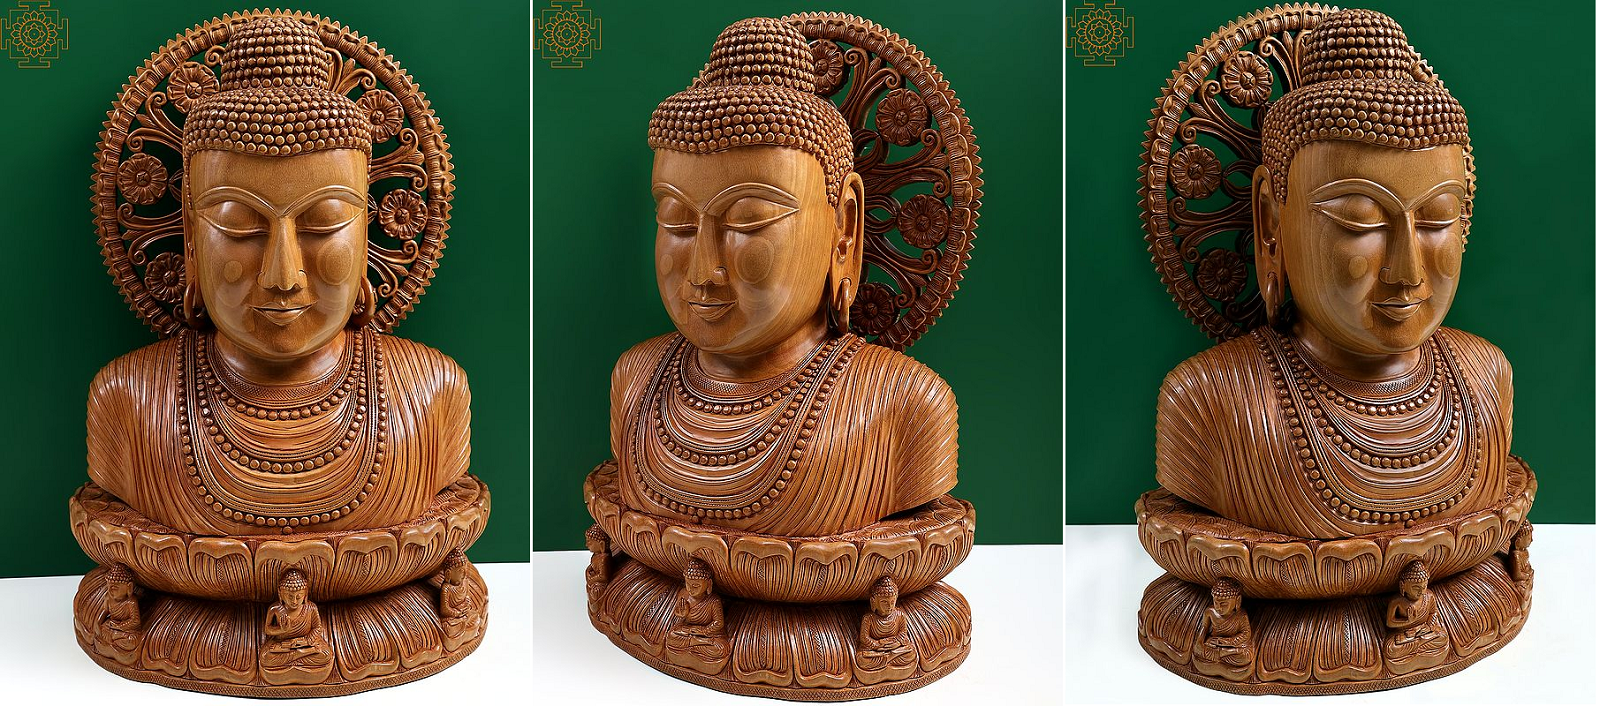 Artisans Crest Brown Intricately Carved Wood Sculpture Of Buddha In Abhaya  Mudra at Rs 45900 in Bengaluru